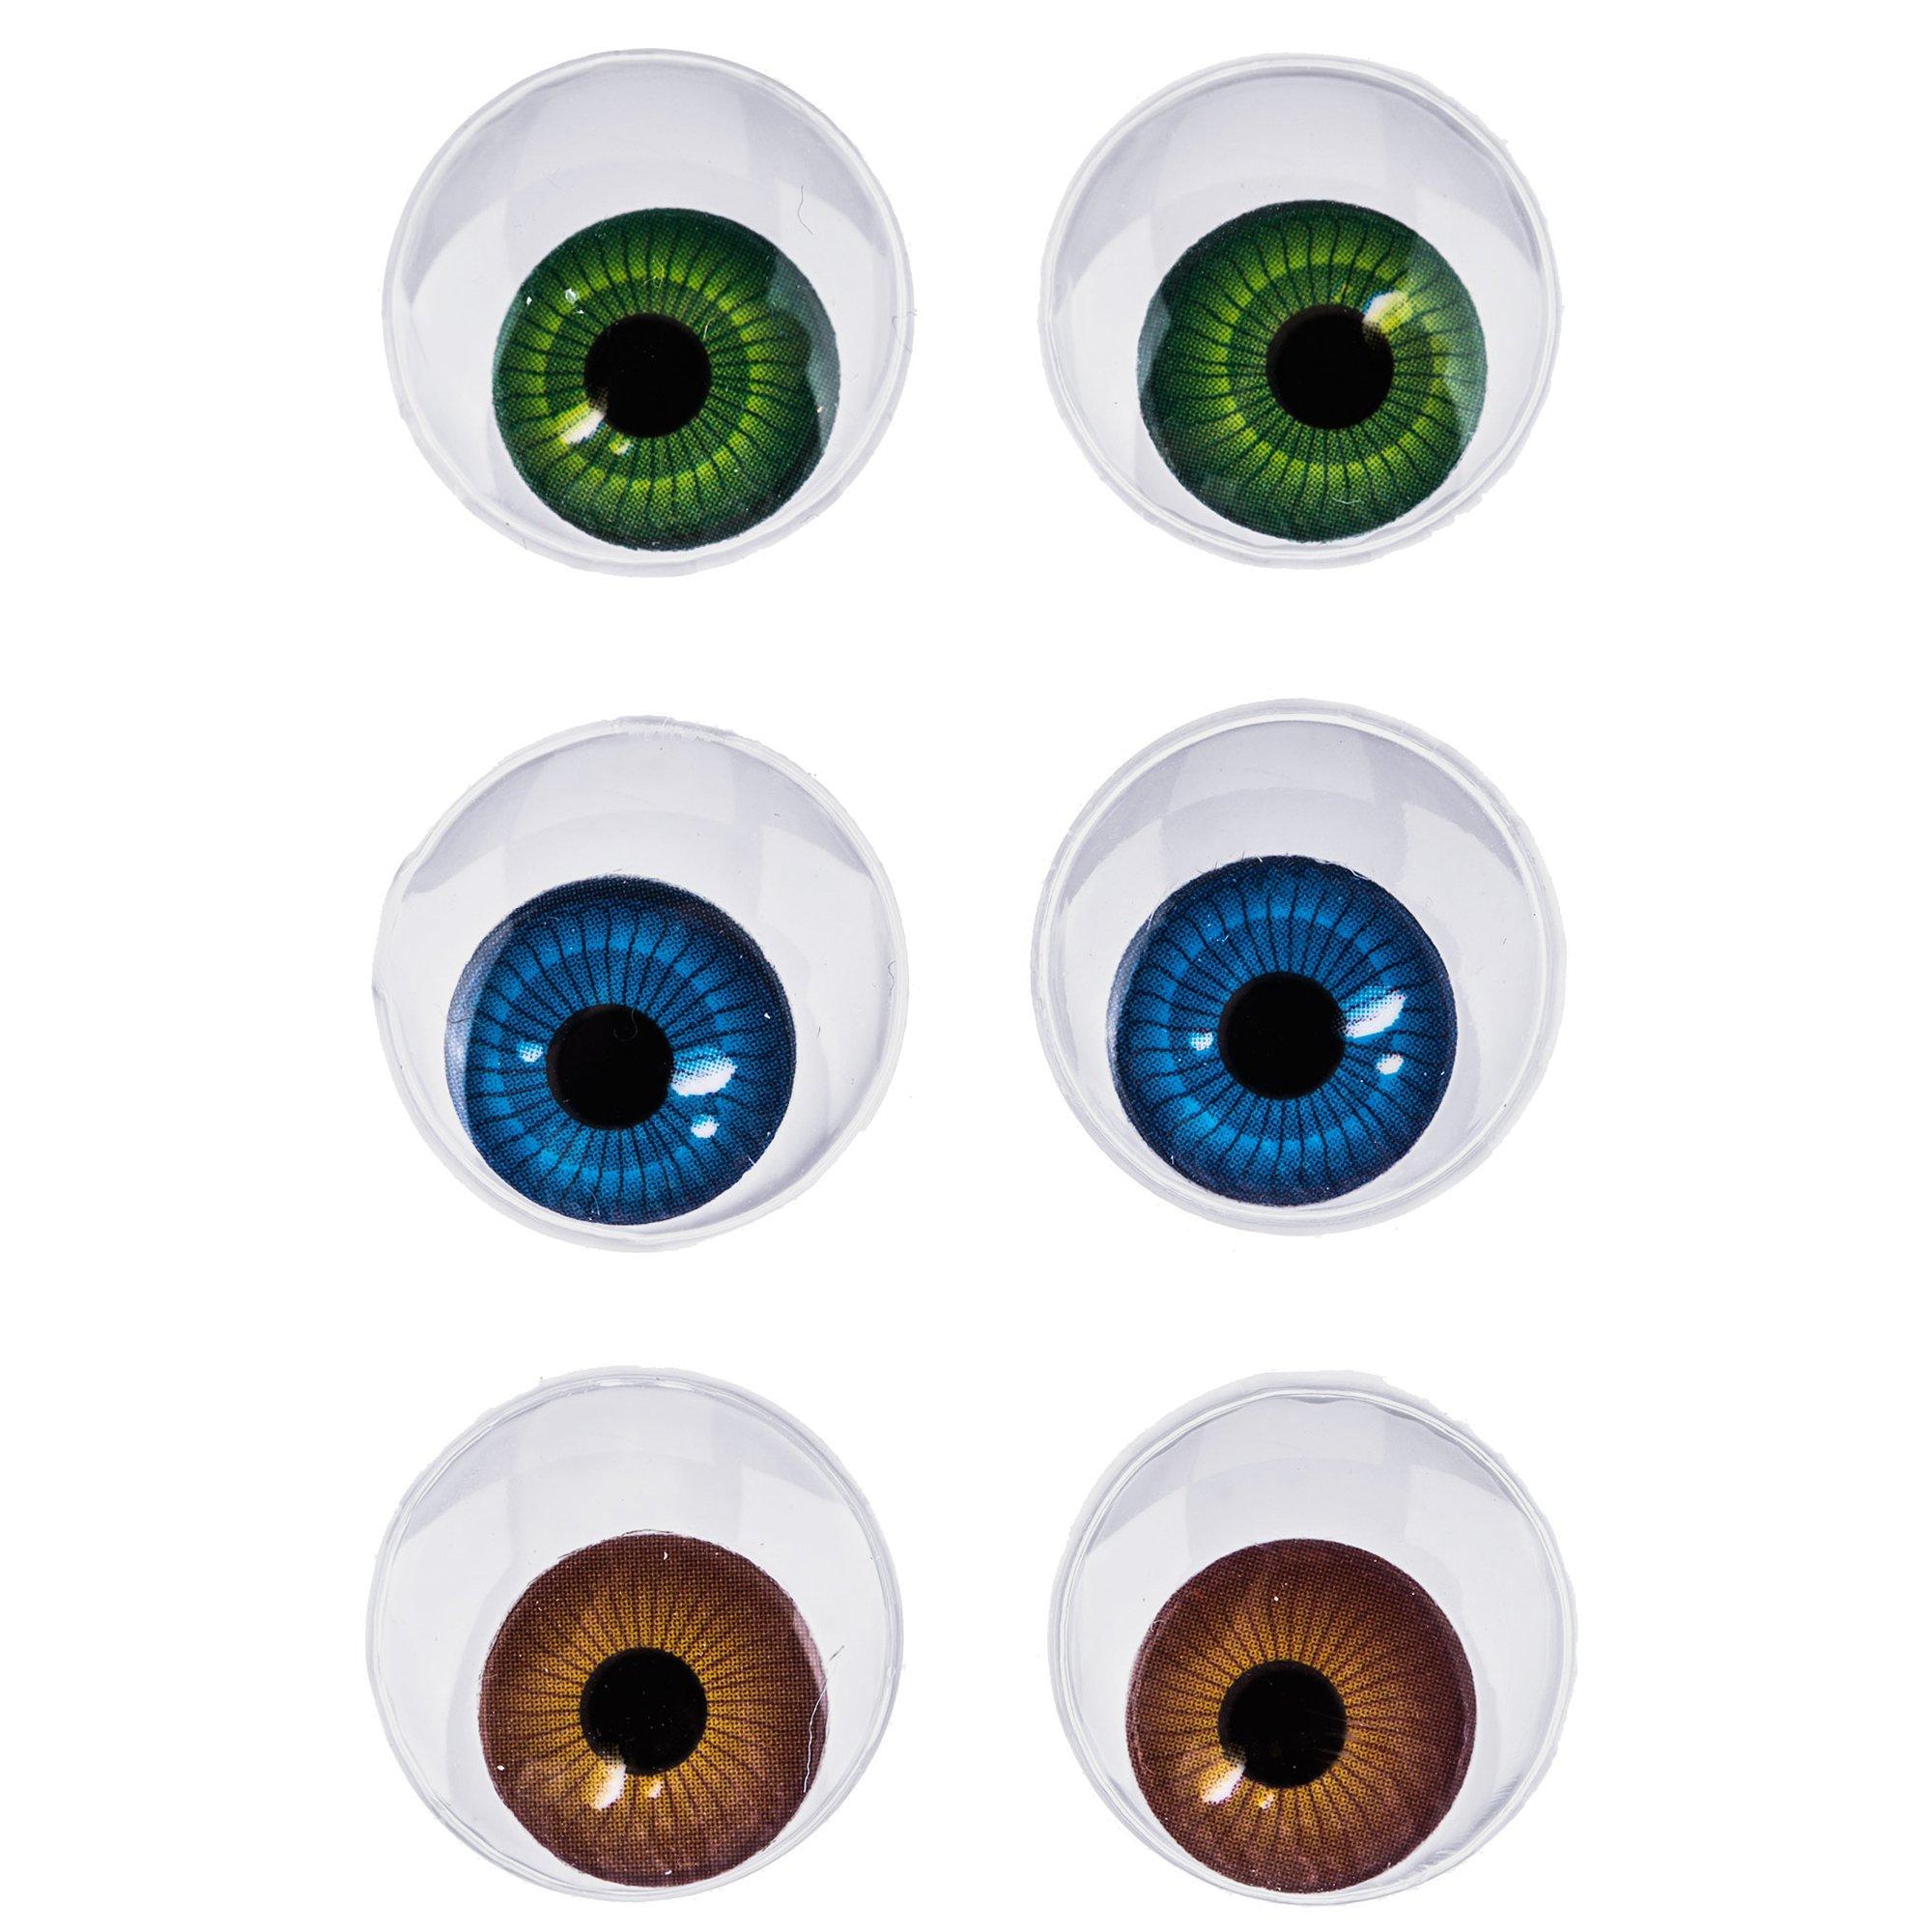 lasenersm 40 Pieces 1.57 (4cm) Round Wiggle Eyes with Self